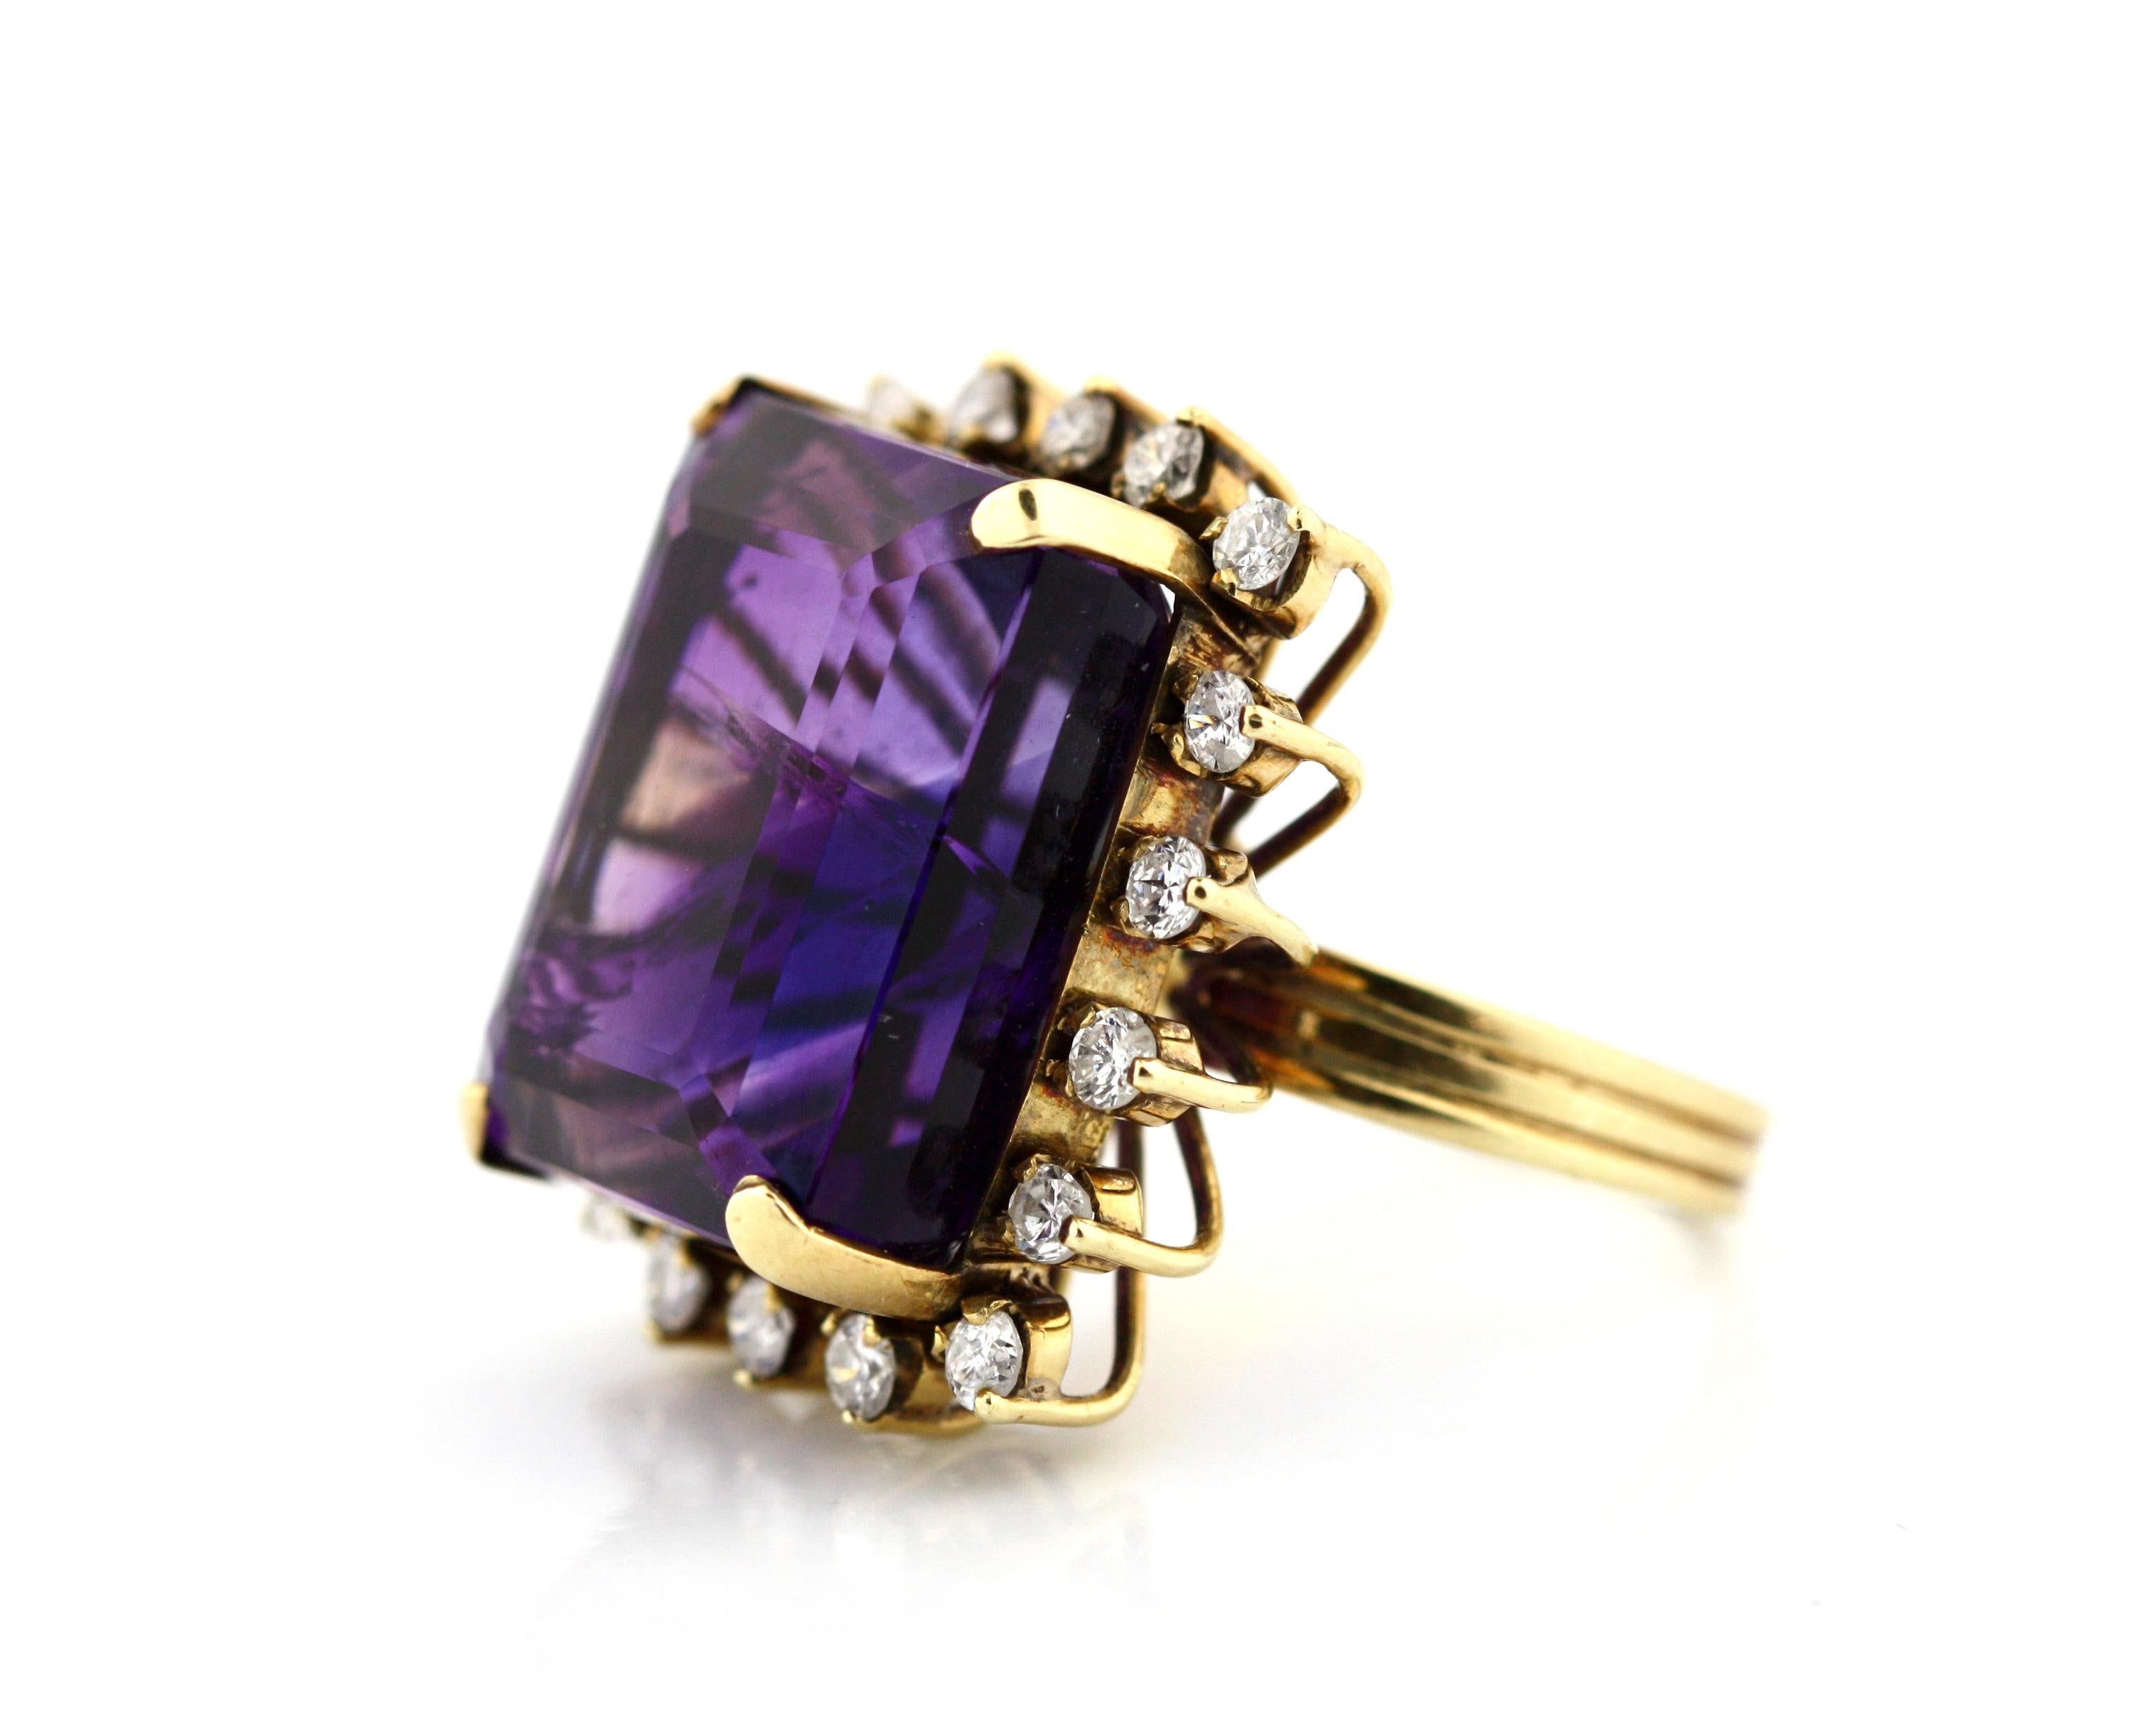 Emerald Cut Diamond and Amethyst Ring For Sale